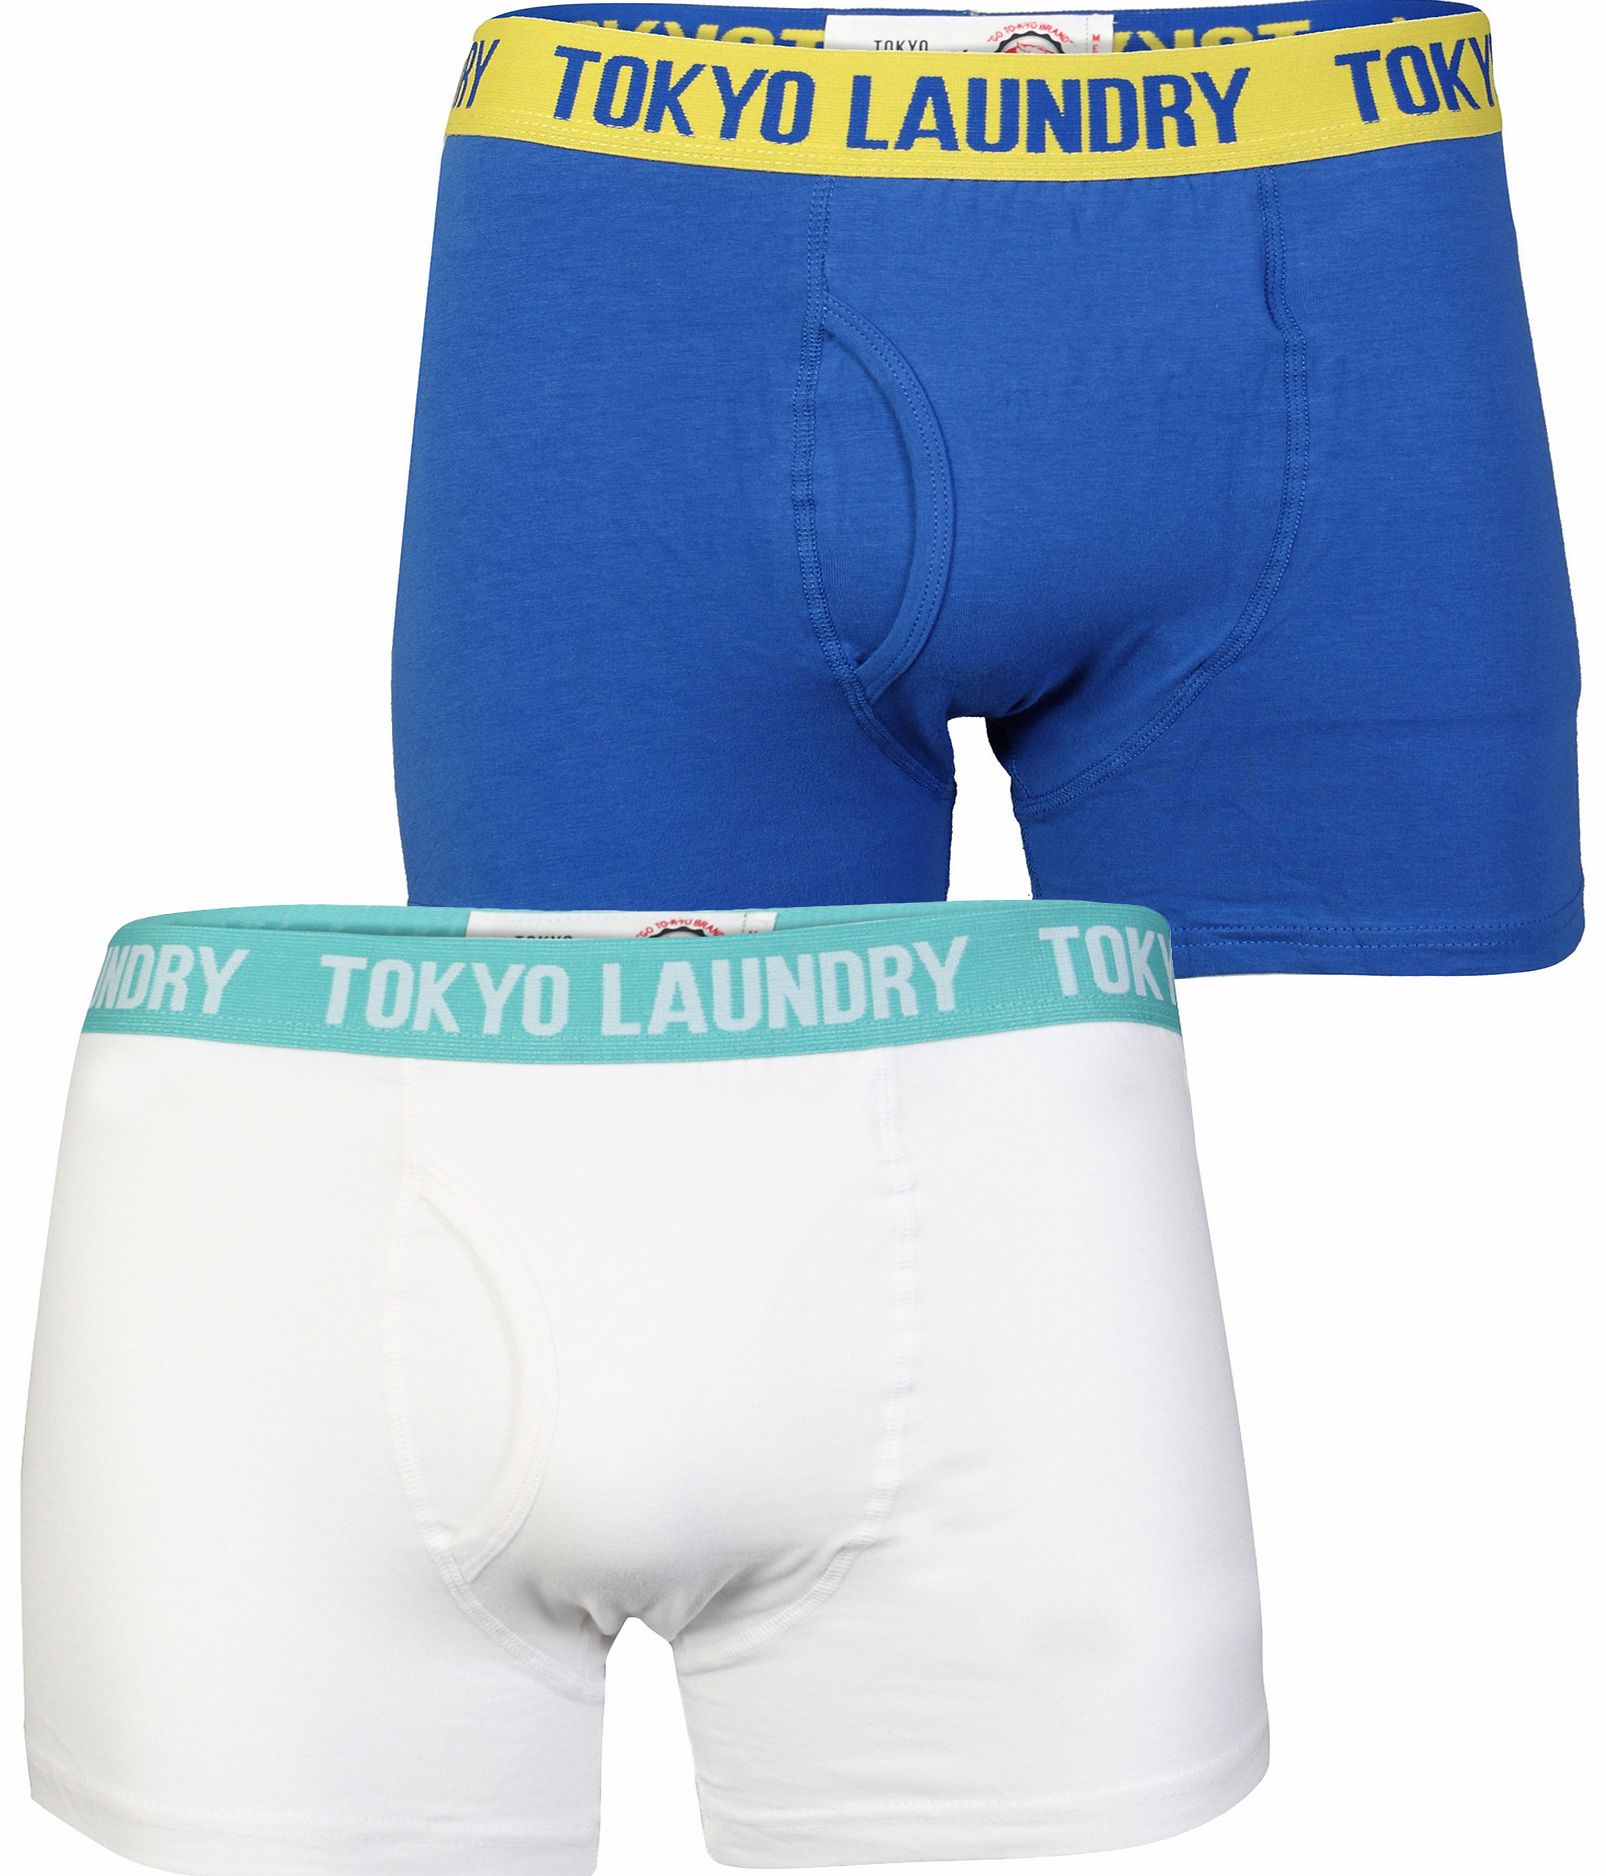 Tokyo laundry Sports Boxers